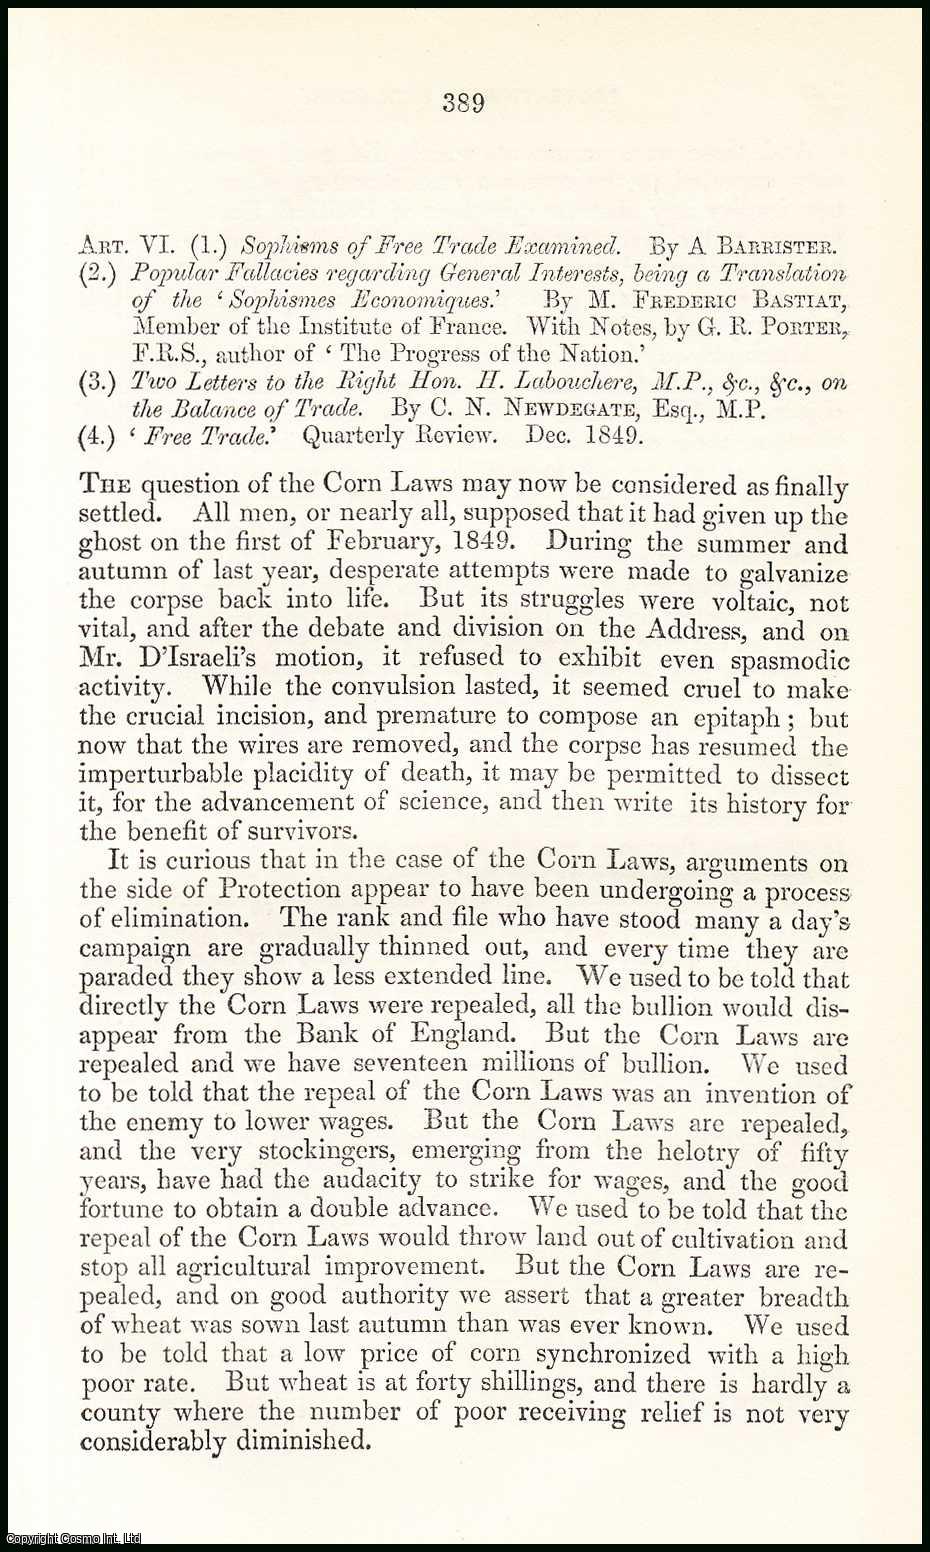 Edward Baines - Protectionist Fallacies : Corn Laws. A rare original article from the British Quarterly Review, 1850.